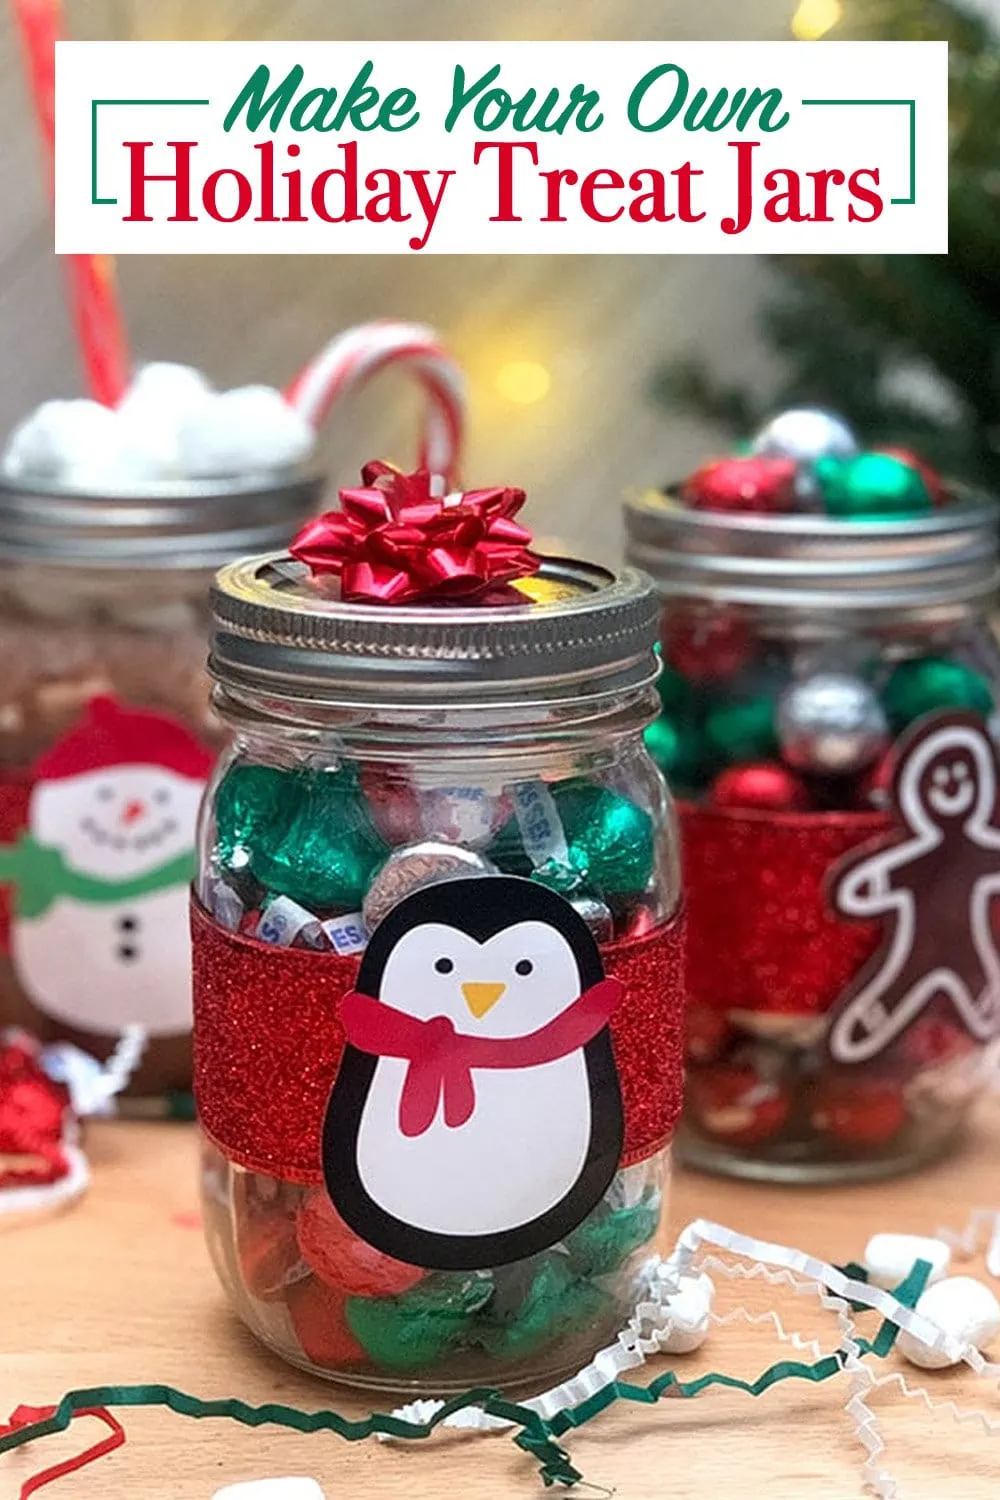 DIY Holiday Treat Jars with cute characters designed by Jen Goode